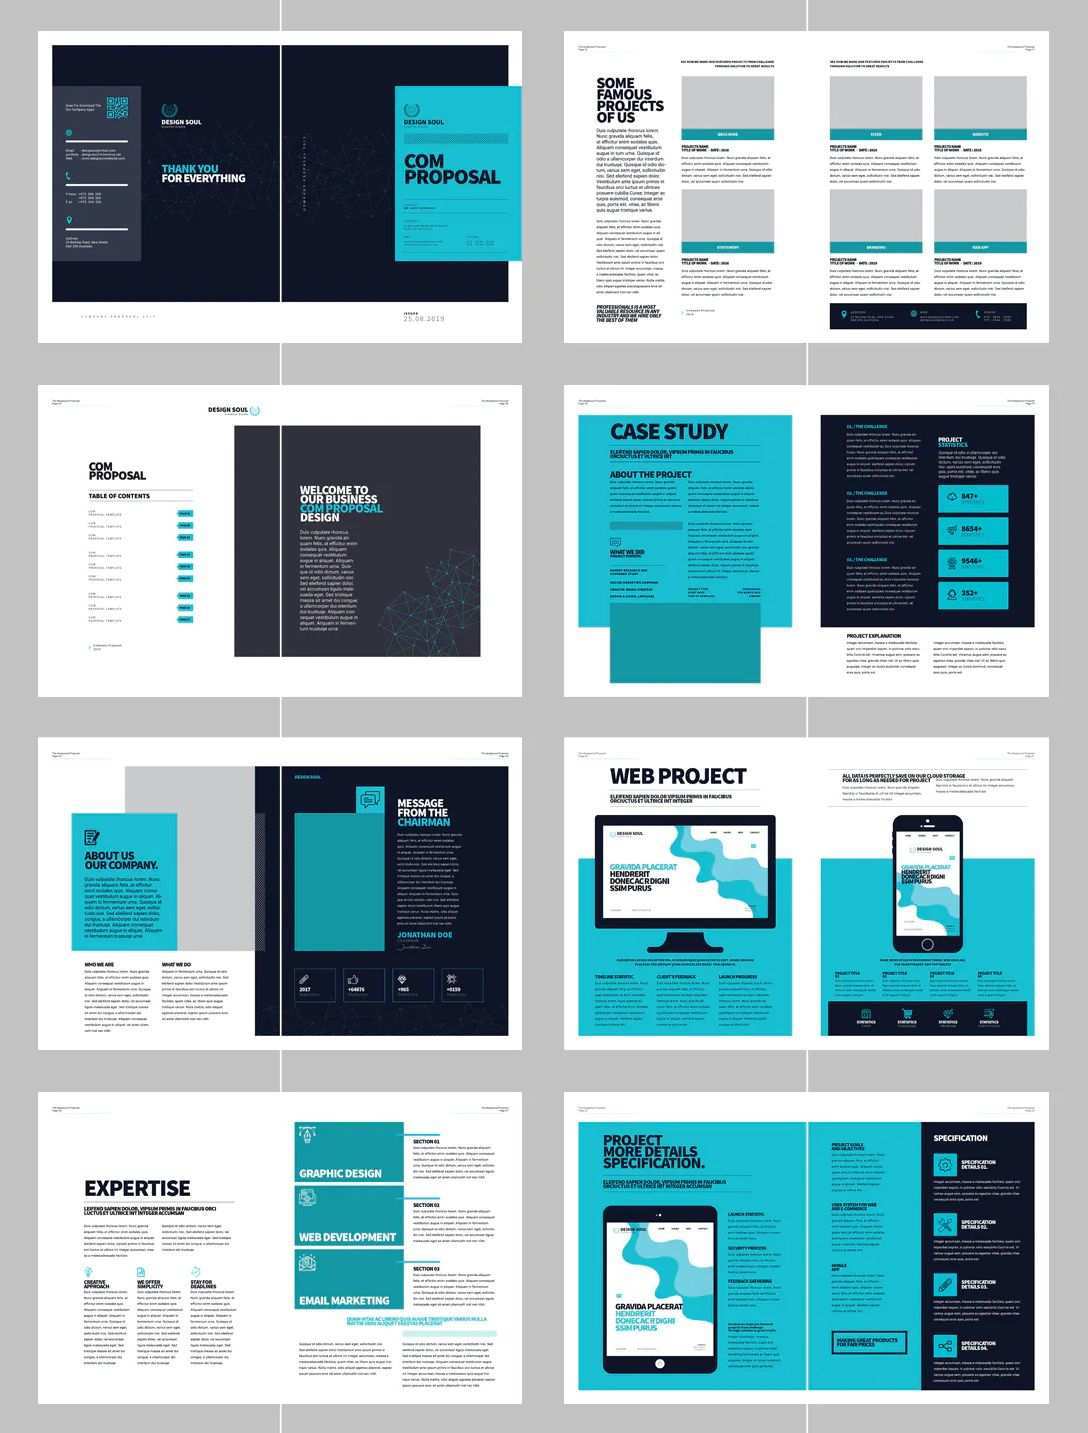 Clean Professional Proposal Template 32 Pages In 2020 Book Design Layout Proposal Templates Ebook Design Layout